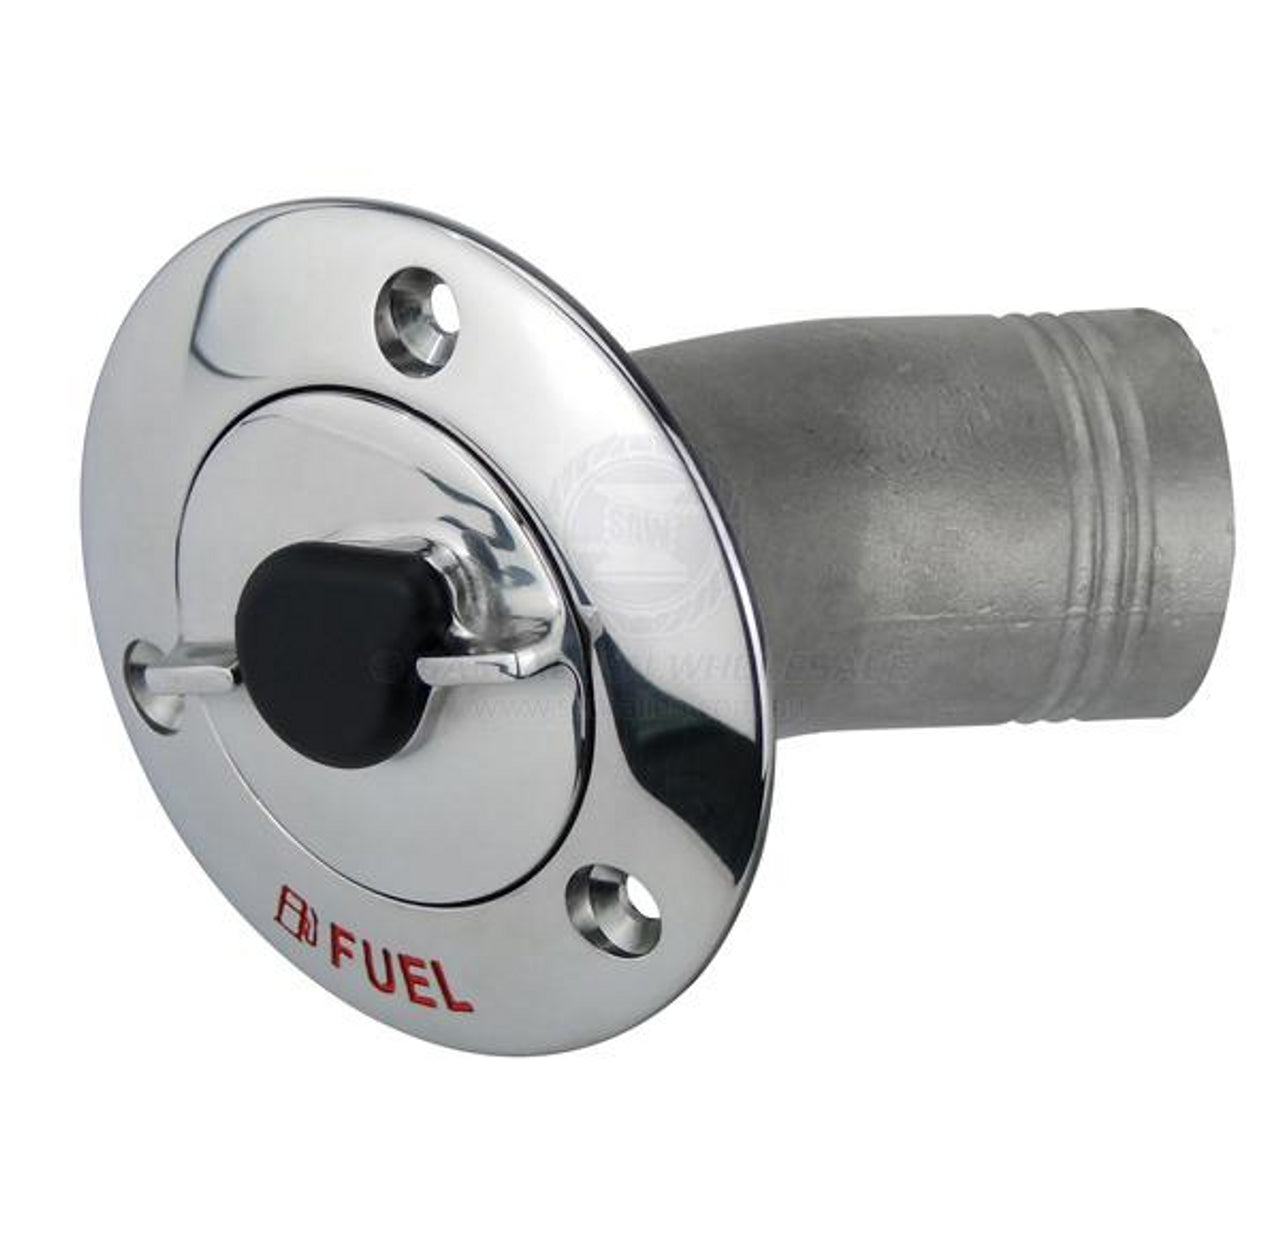 38mm Angled Fuel Filler with Breather - Lockable Stainless Steel